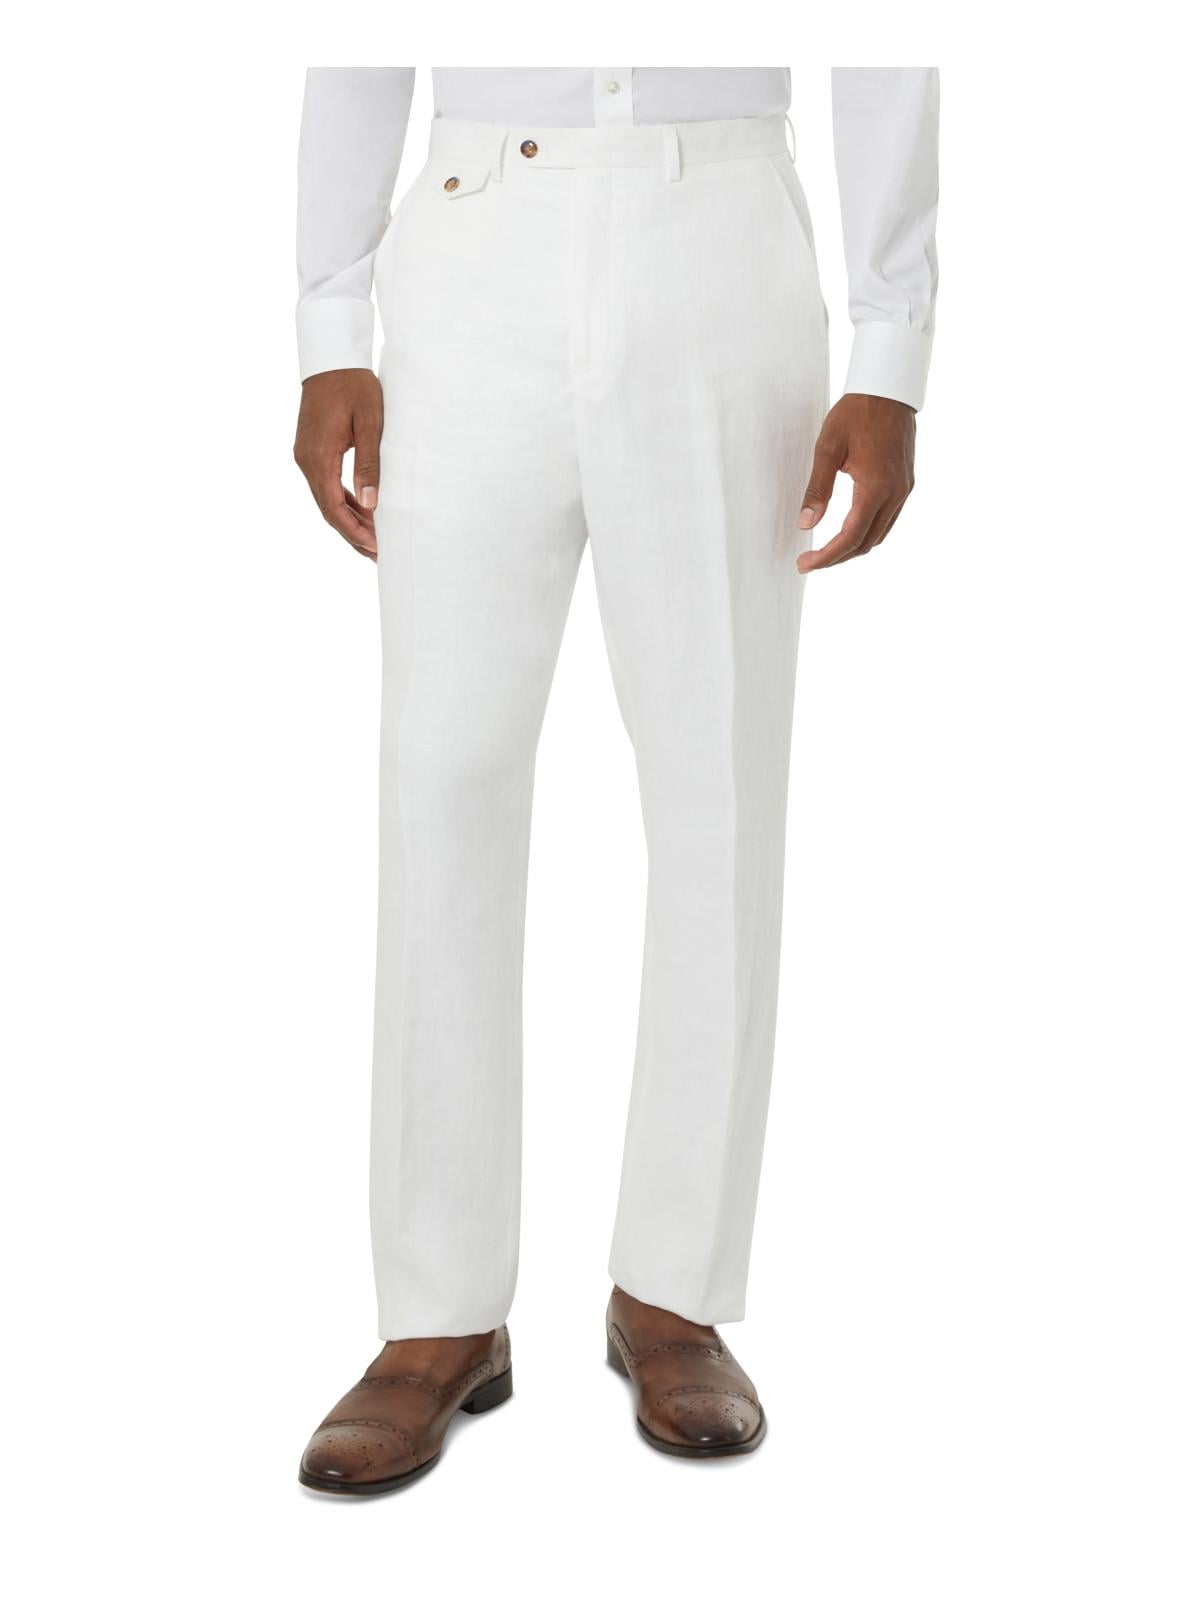 Tayion By Montee Holland Mens Linen Classic Fit Suit Pants - Walmart.com